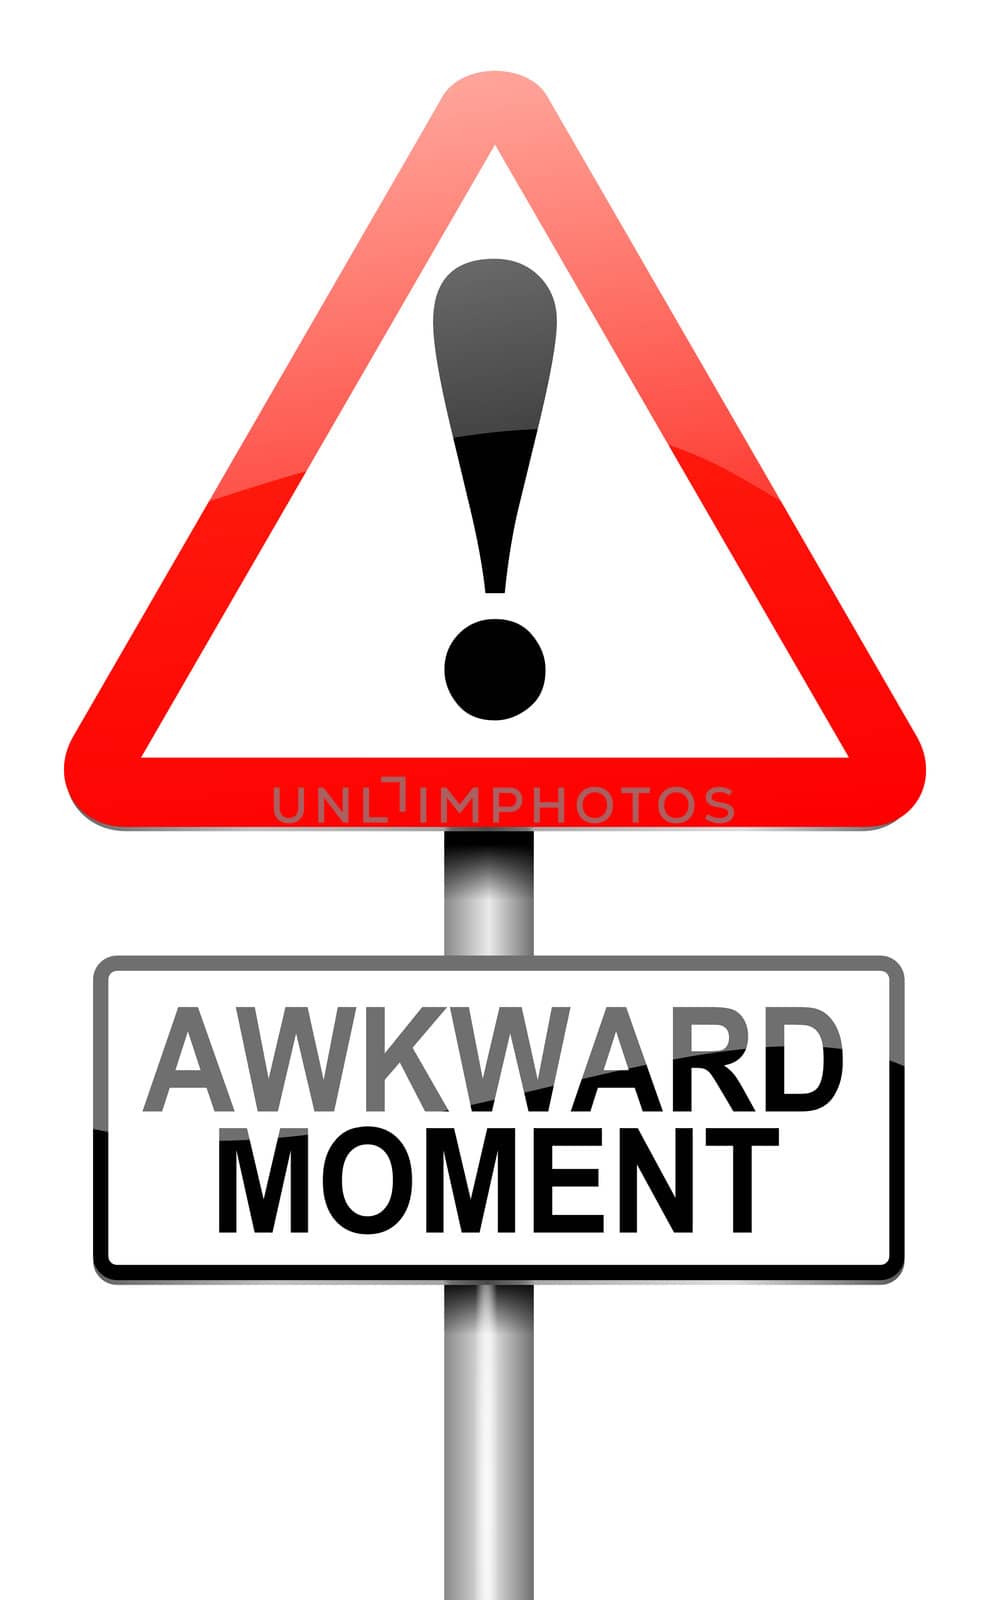 Illustration depicting a roadsign with an awkward moment concept. White background.